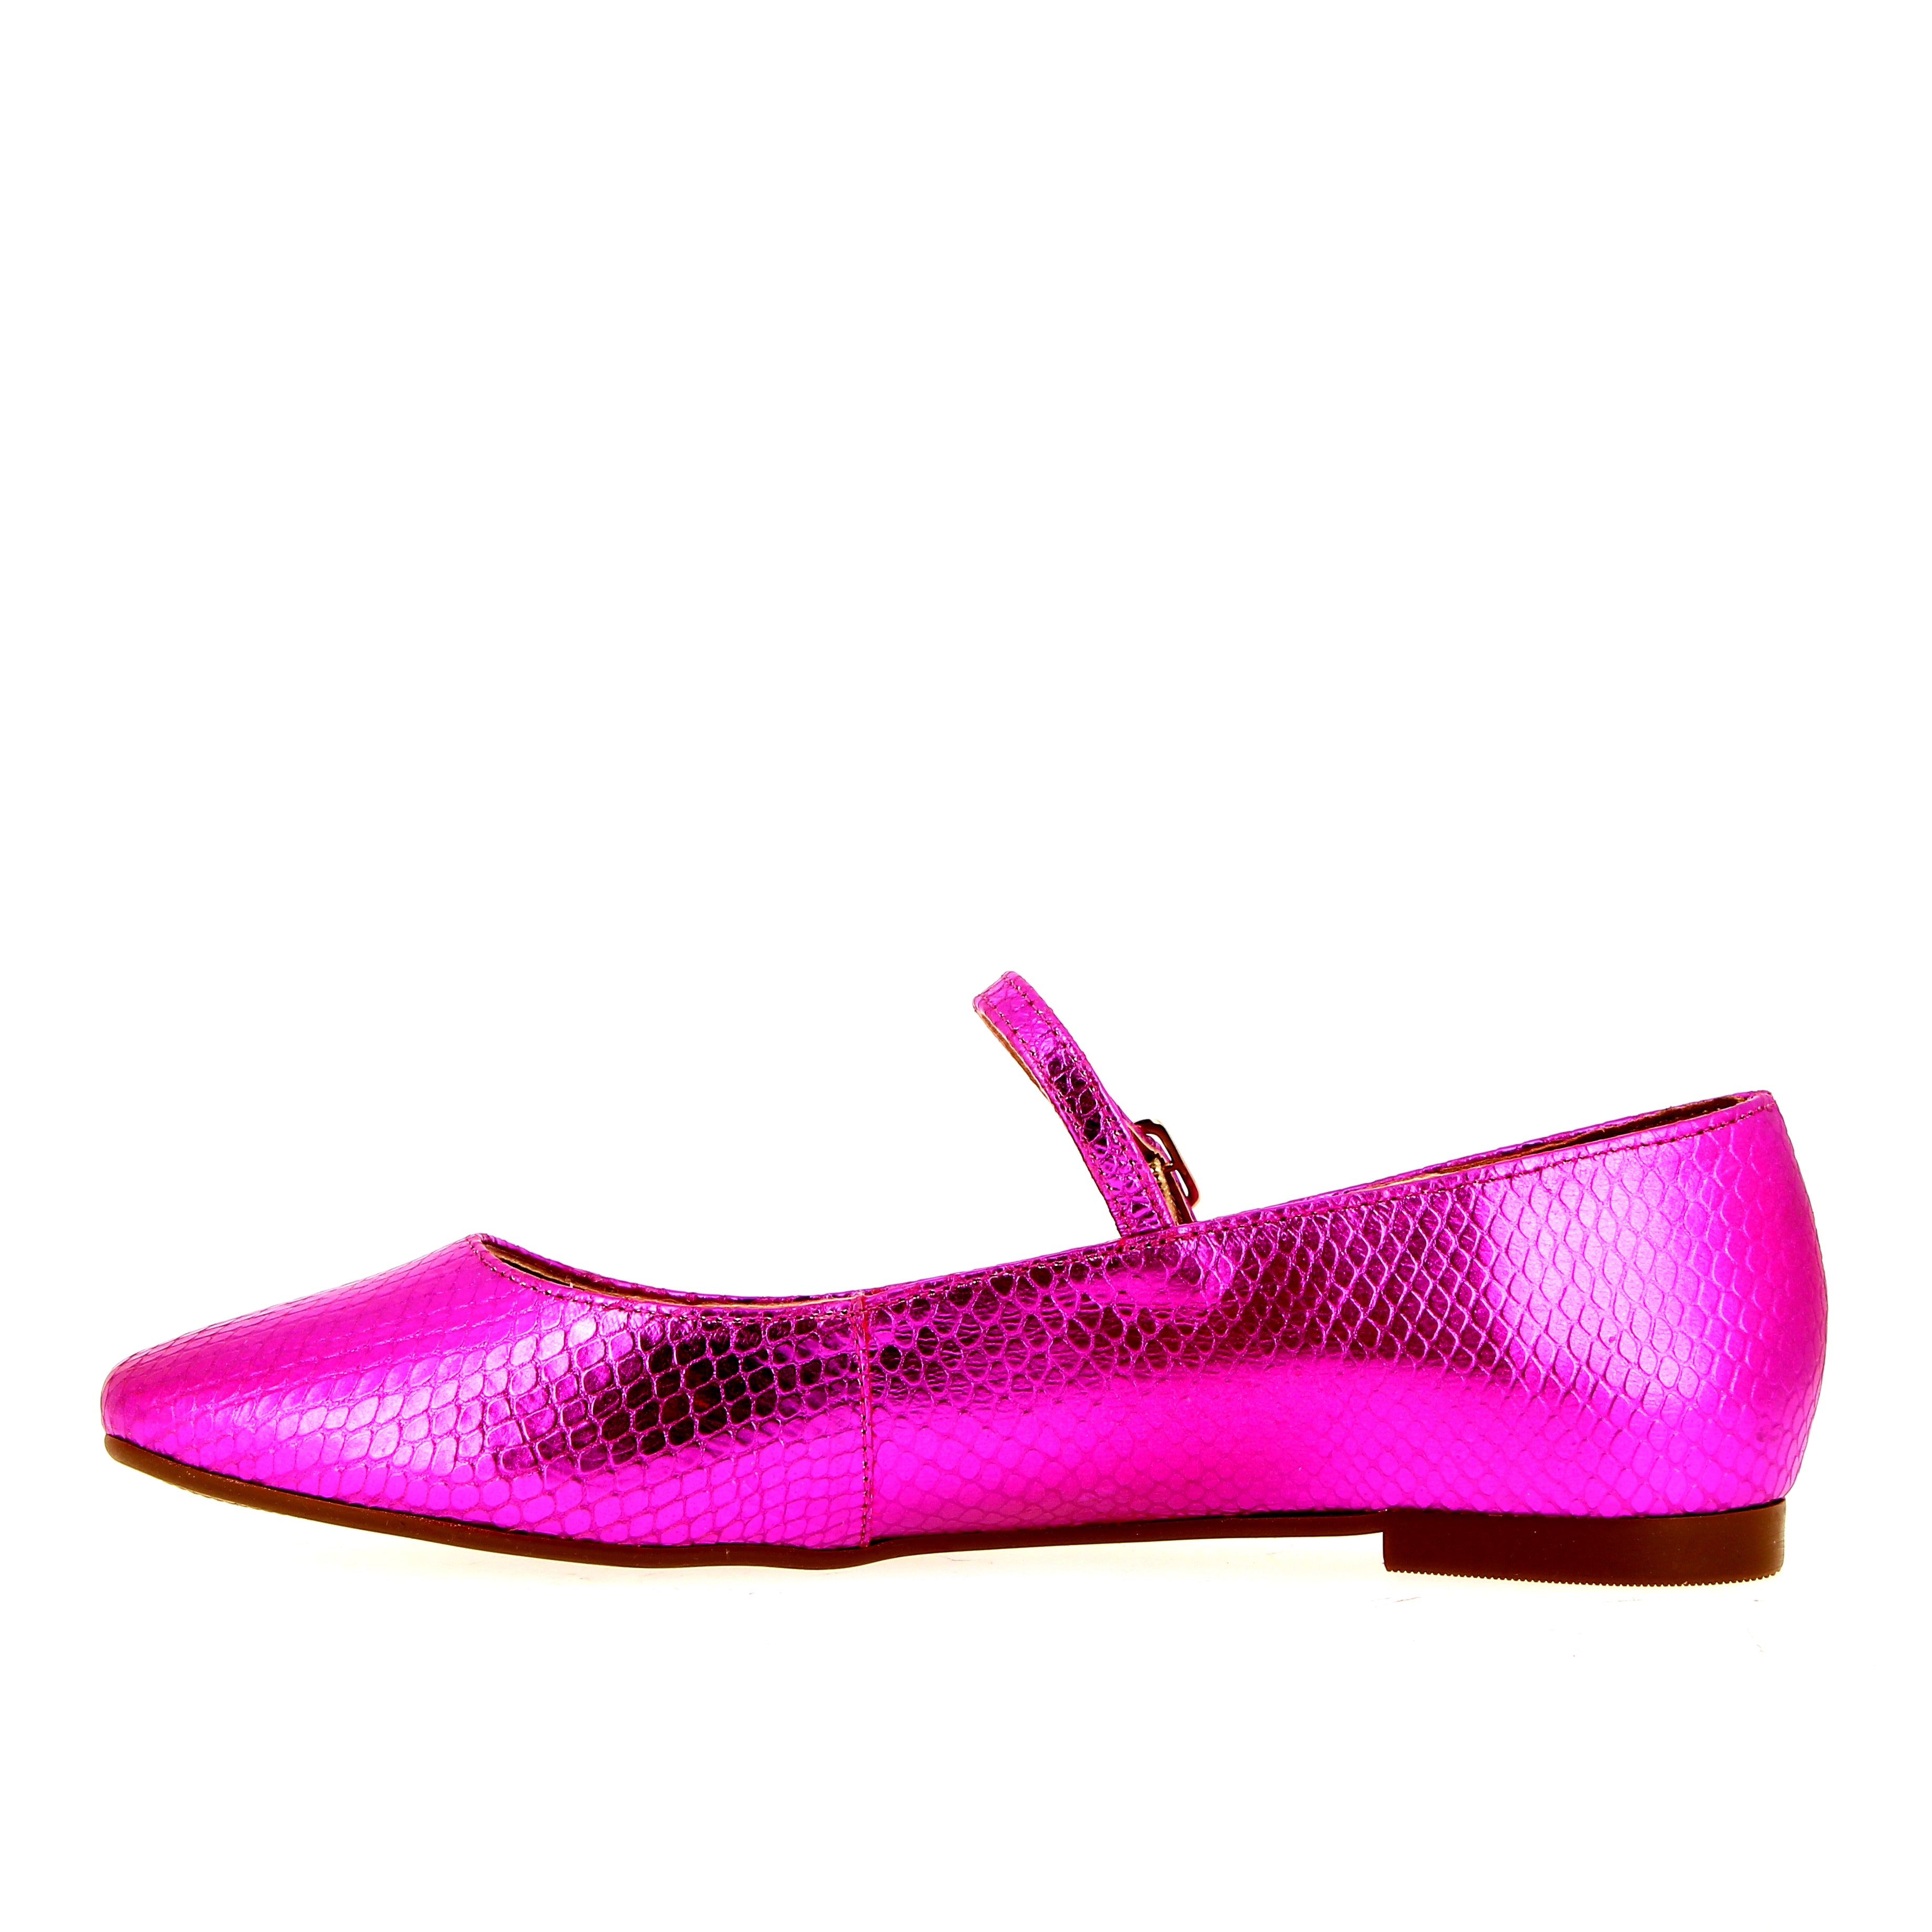 Ballerina with snake-finish pink leather strap